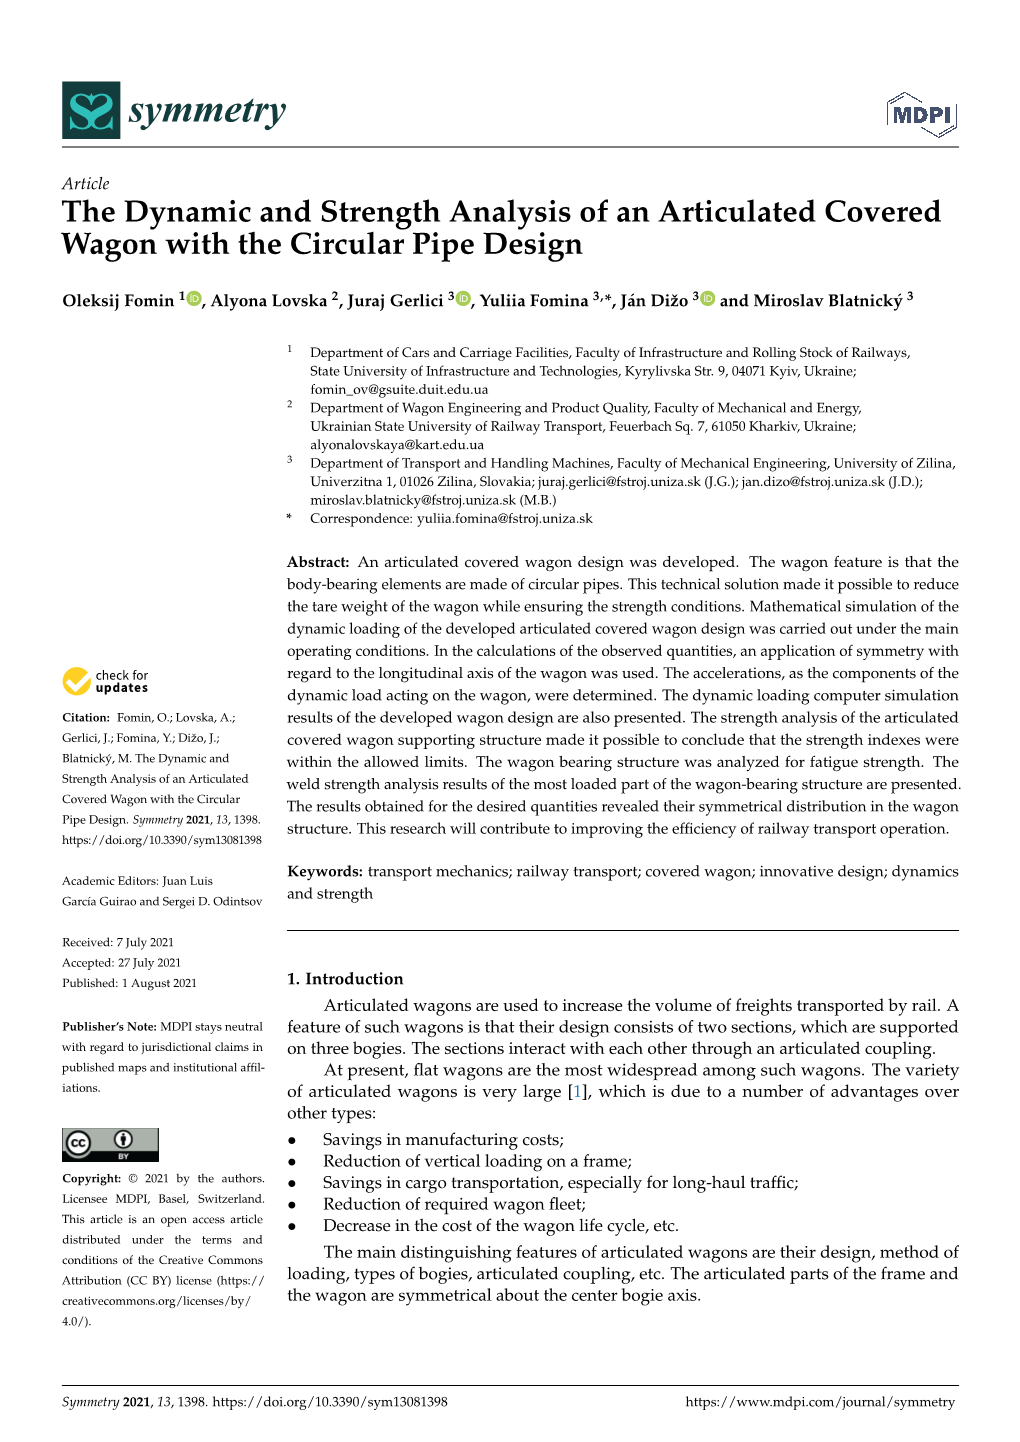 The Dynamic and Strength Analysis of an Articulated Covered Wagon with the Circular Pipe Design